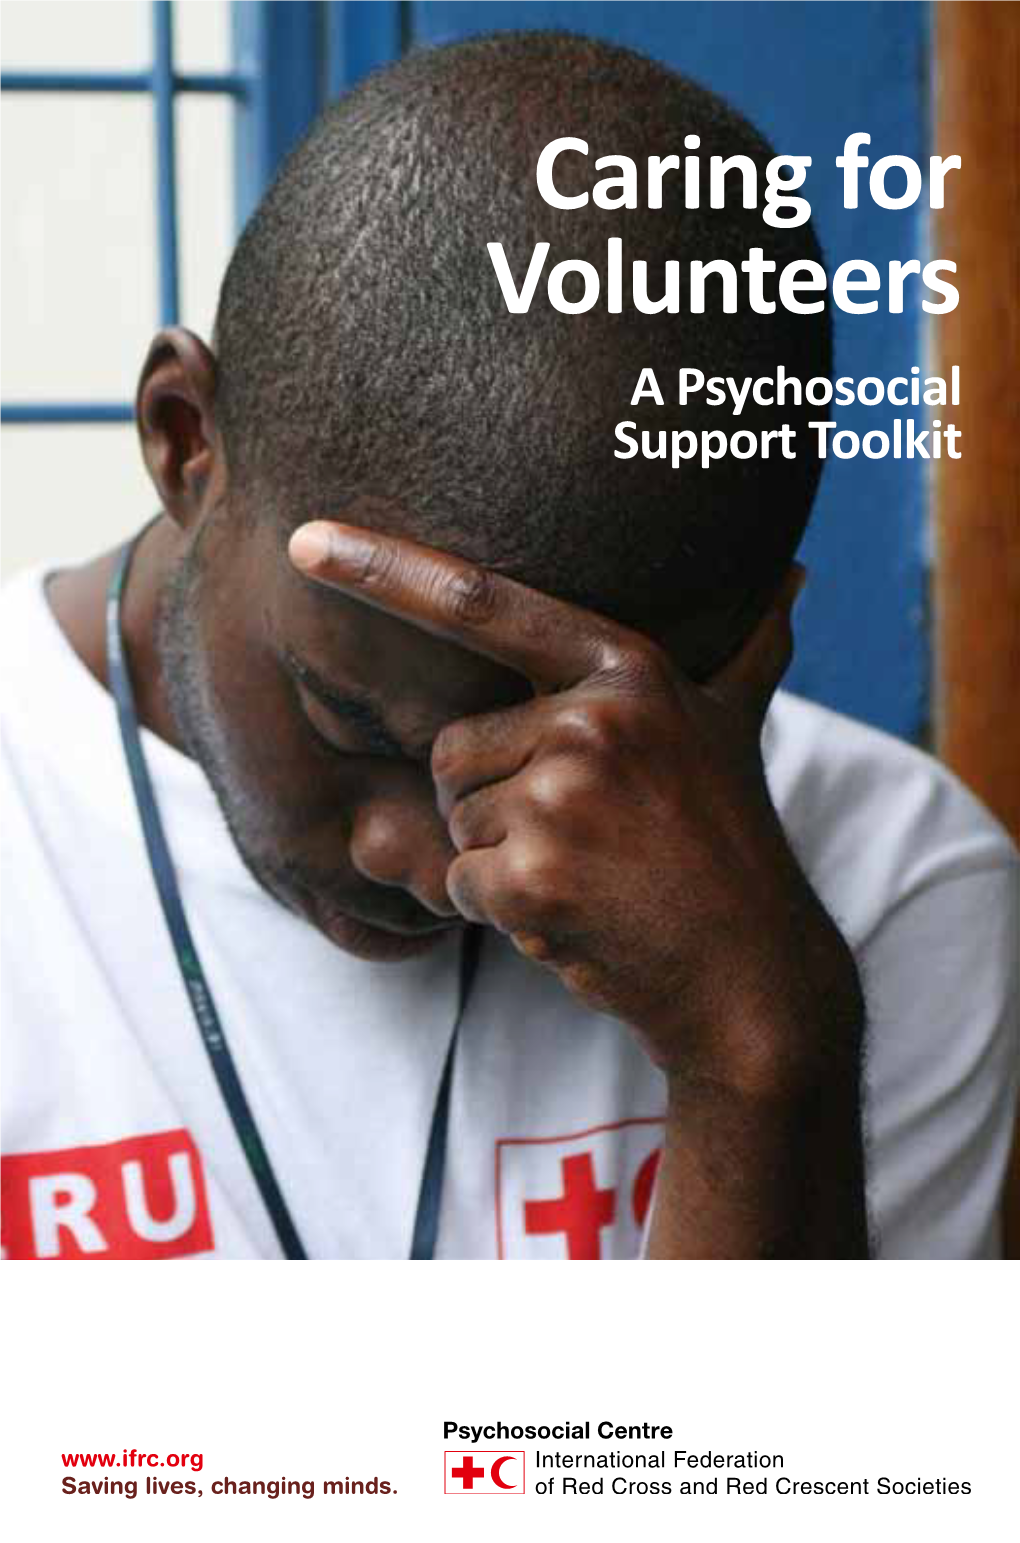 Caring for Volunteers a Psychosocial Support Toolkit